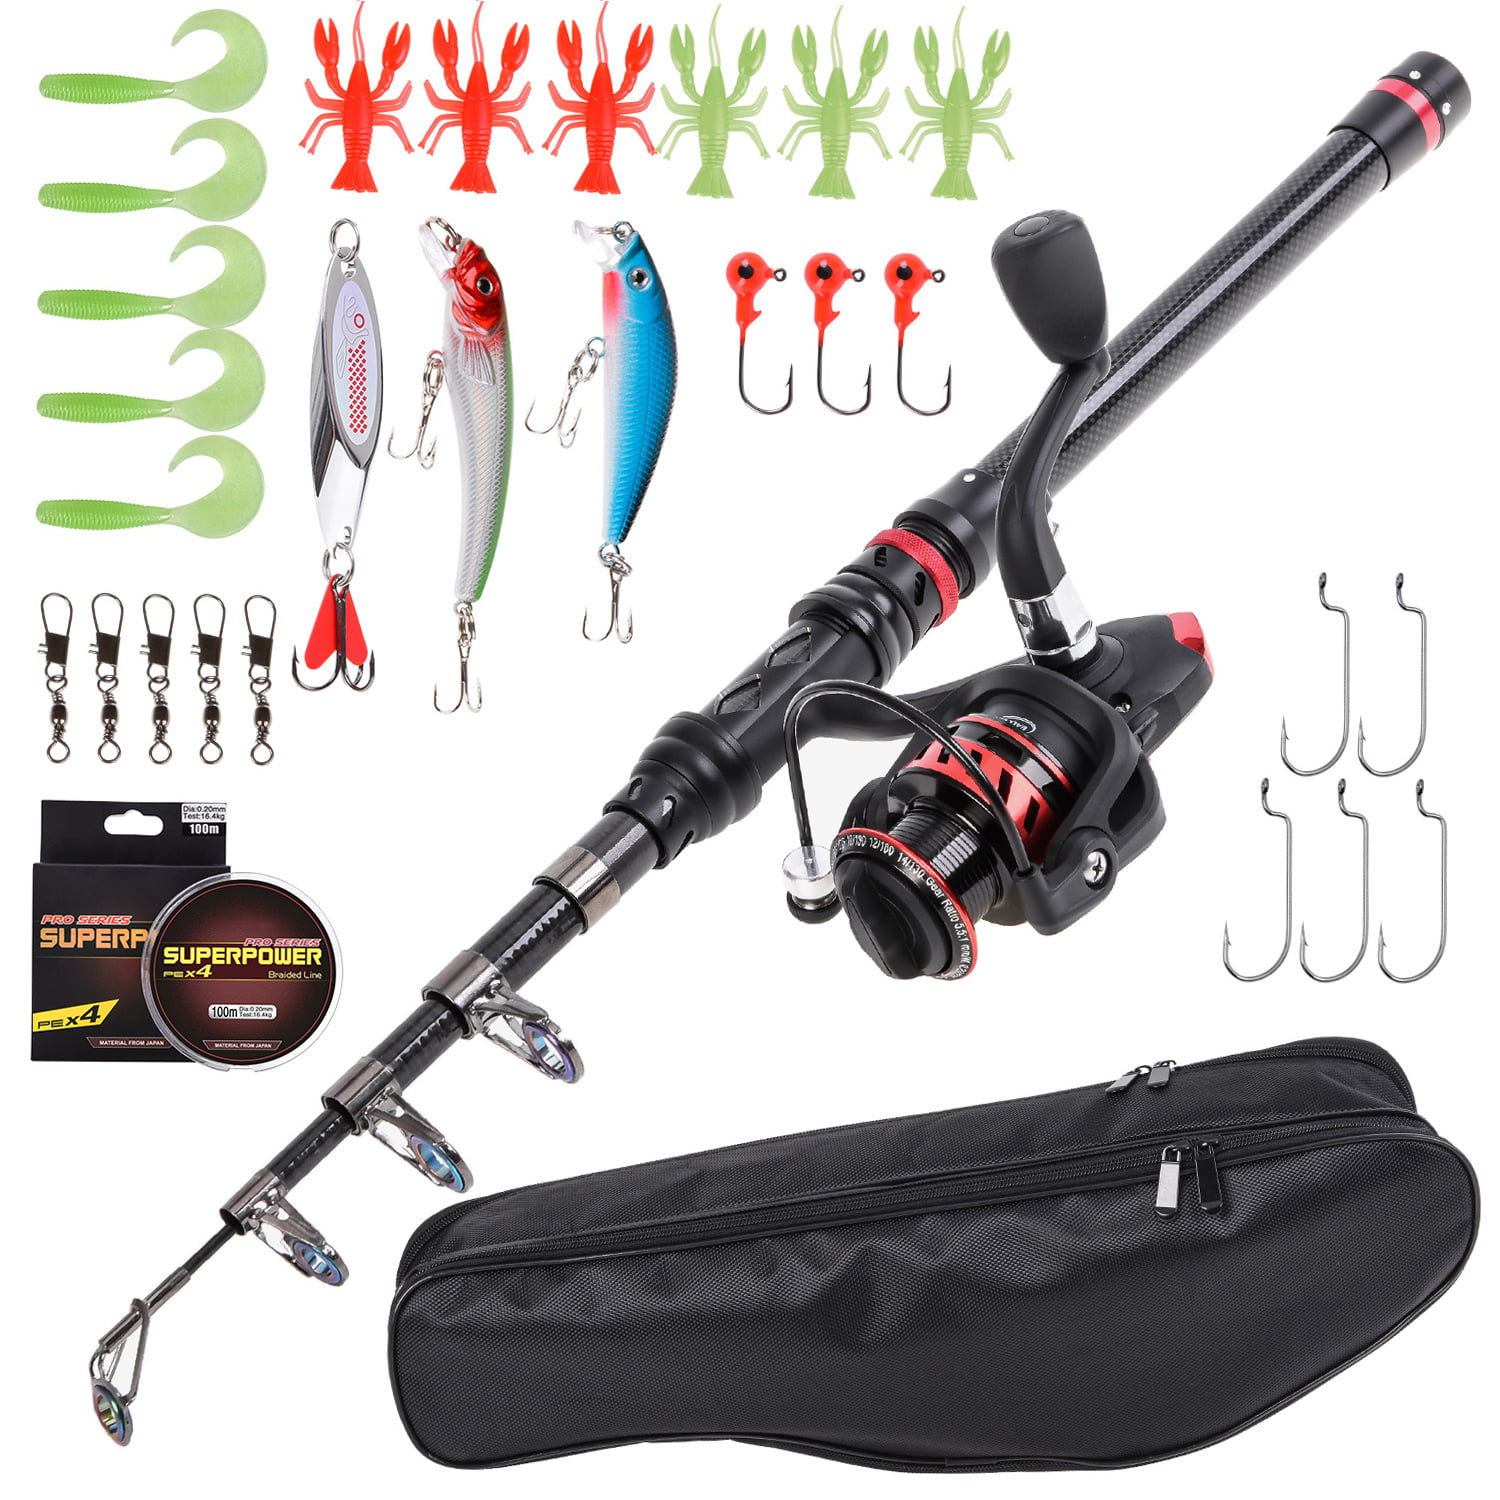 Telescopic Spinning Fishing Rod&Reels Set Combo Carbon Fishing Pole Tackle Tools 